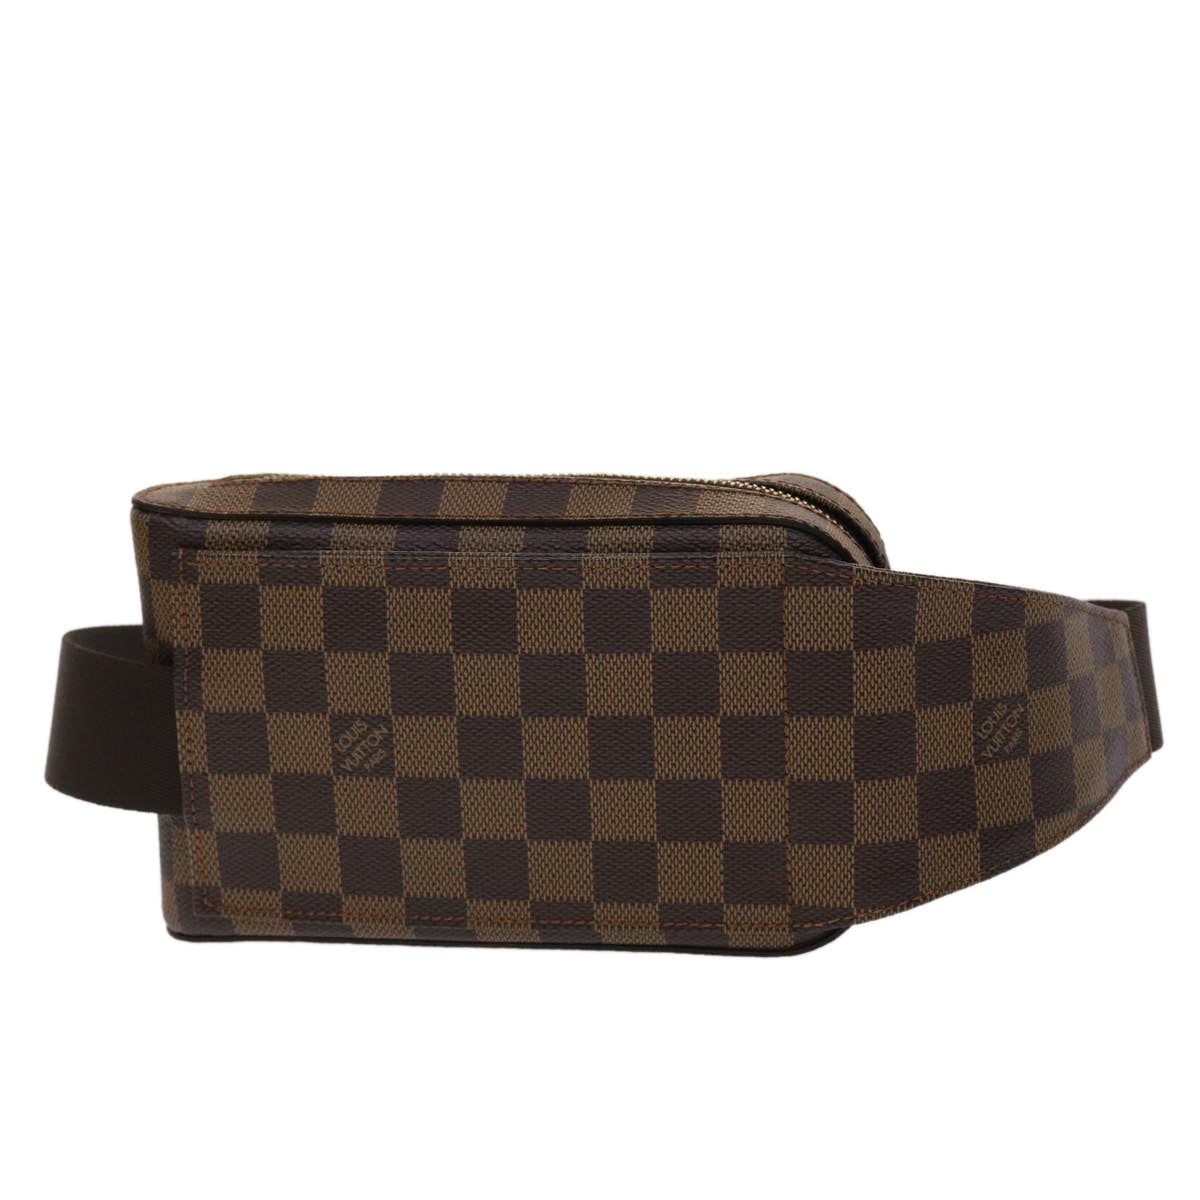 【Instagram 24 hours SALE】LOUIS VUITTON Damier Ebene Geronimos Shoulder Bag N51994 LV Auth 46568A    ※Coupon cannot be used